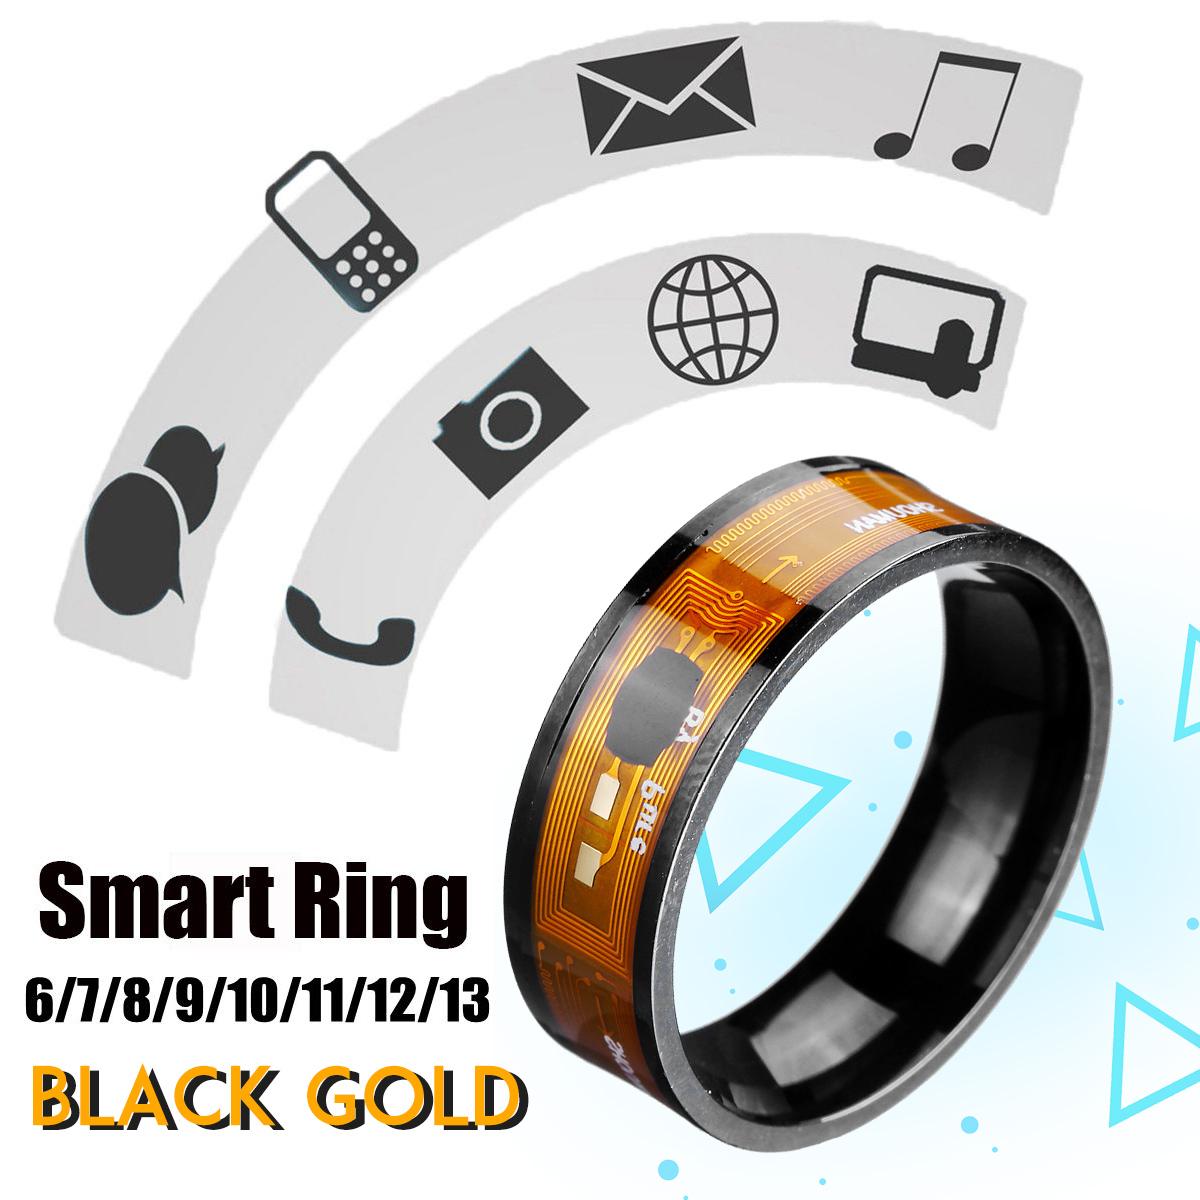 Fashion Men's Smart Ring Magic Wear NFC Ring Finger Digital Ring for Android phones with functional couple stainless steel ring